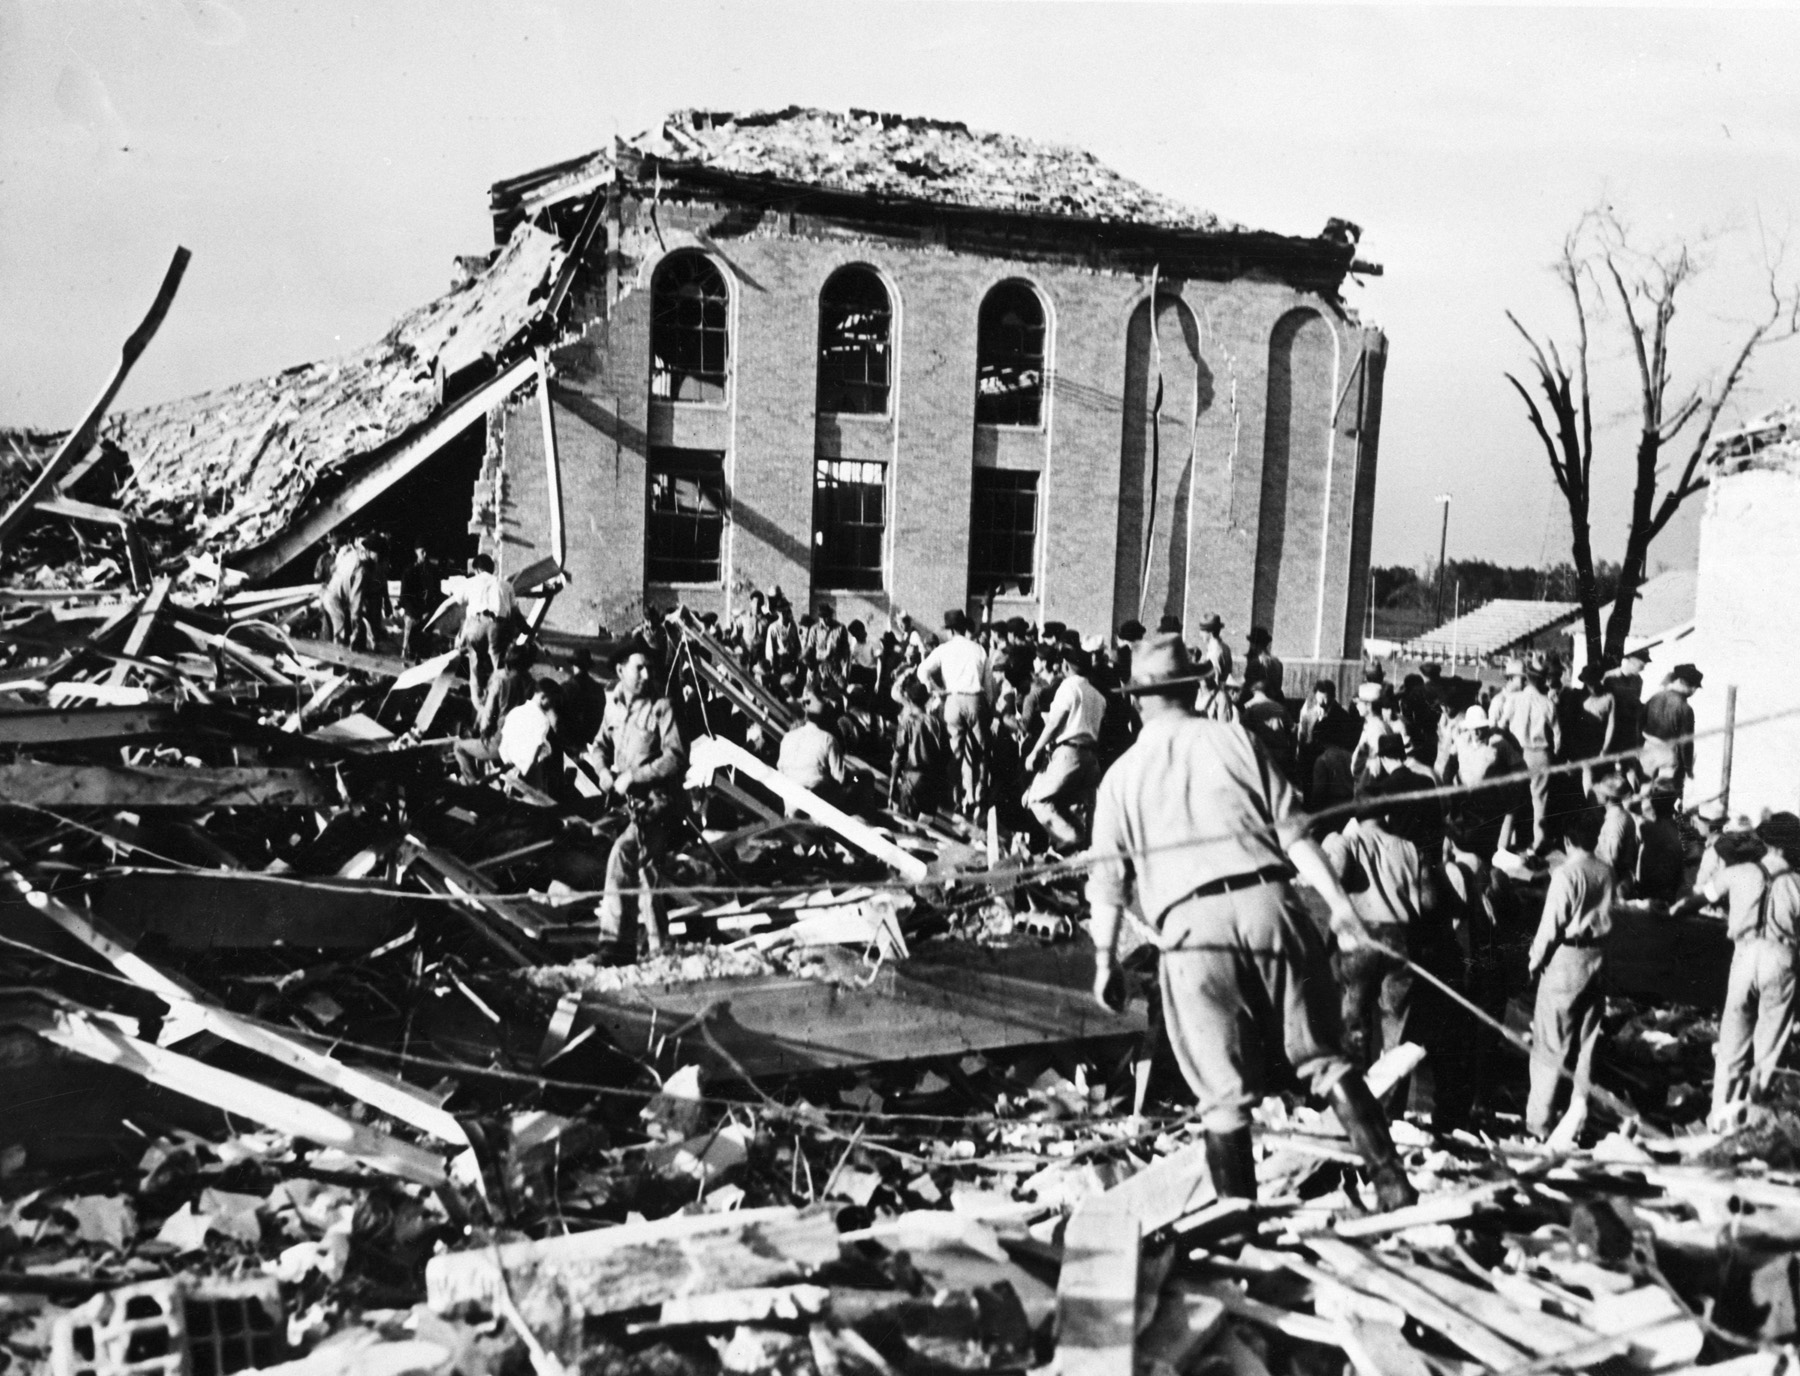 294 killed in New London, Texas school explosion, 80 years ago